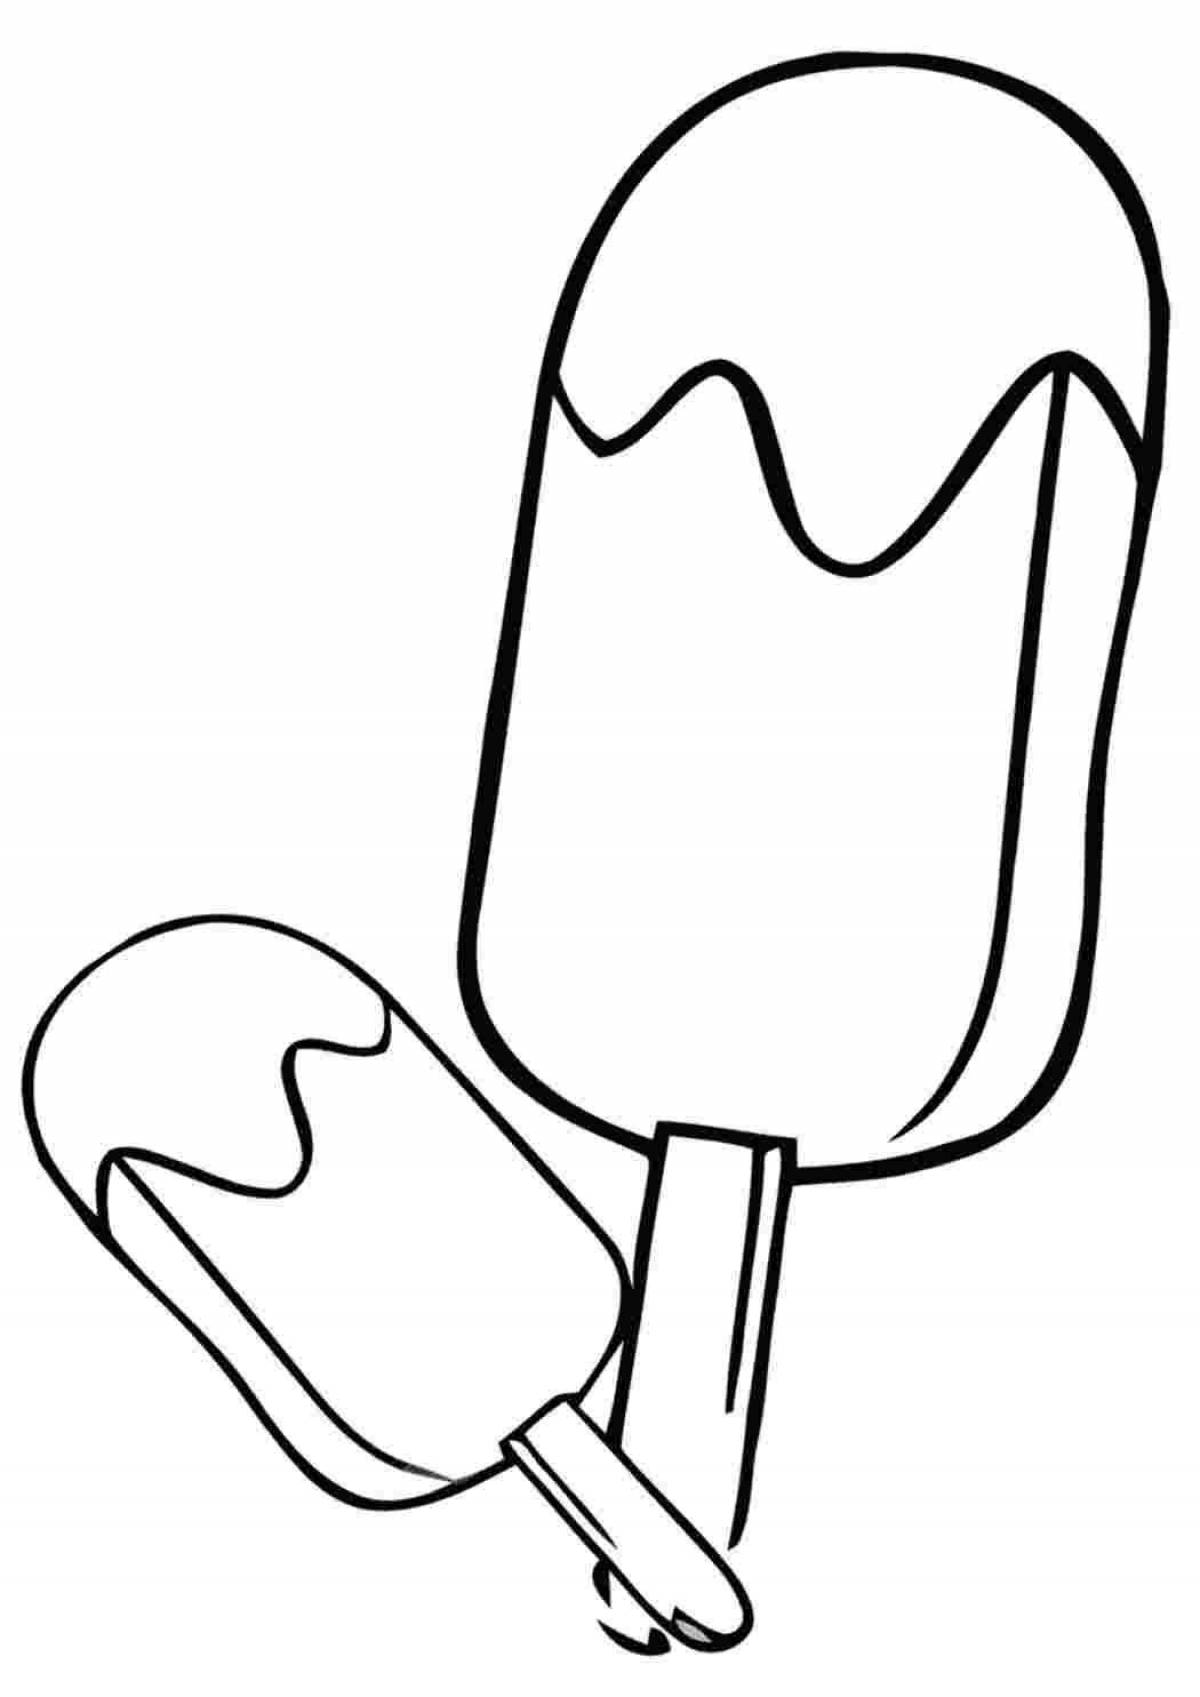 Exciting ice cream and popsicle coloring book